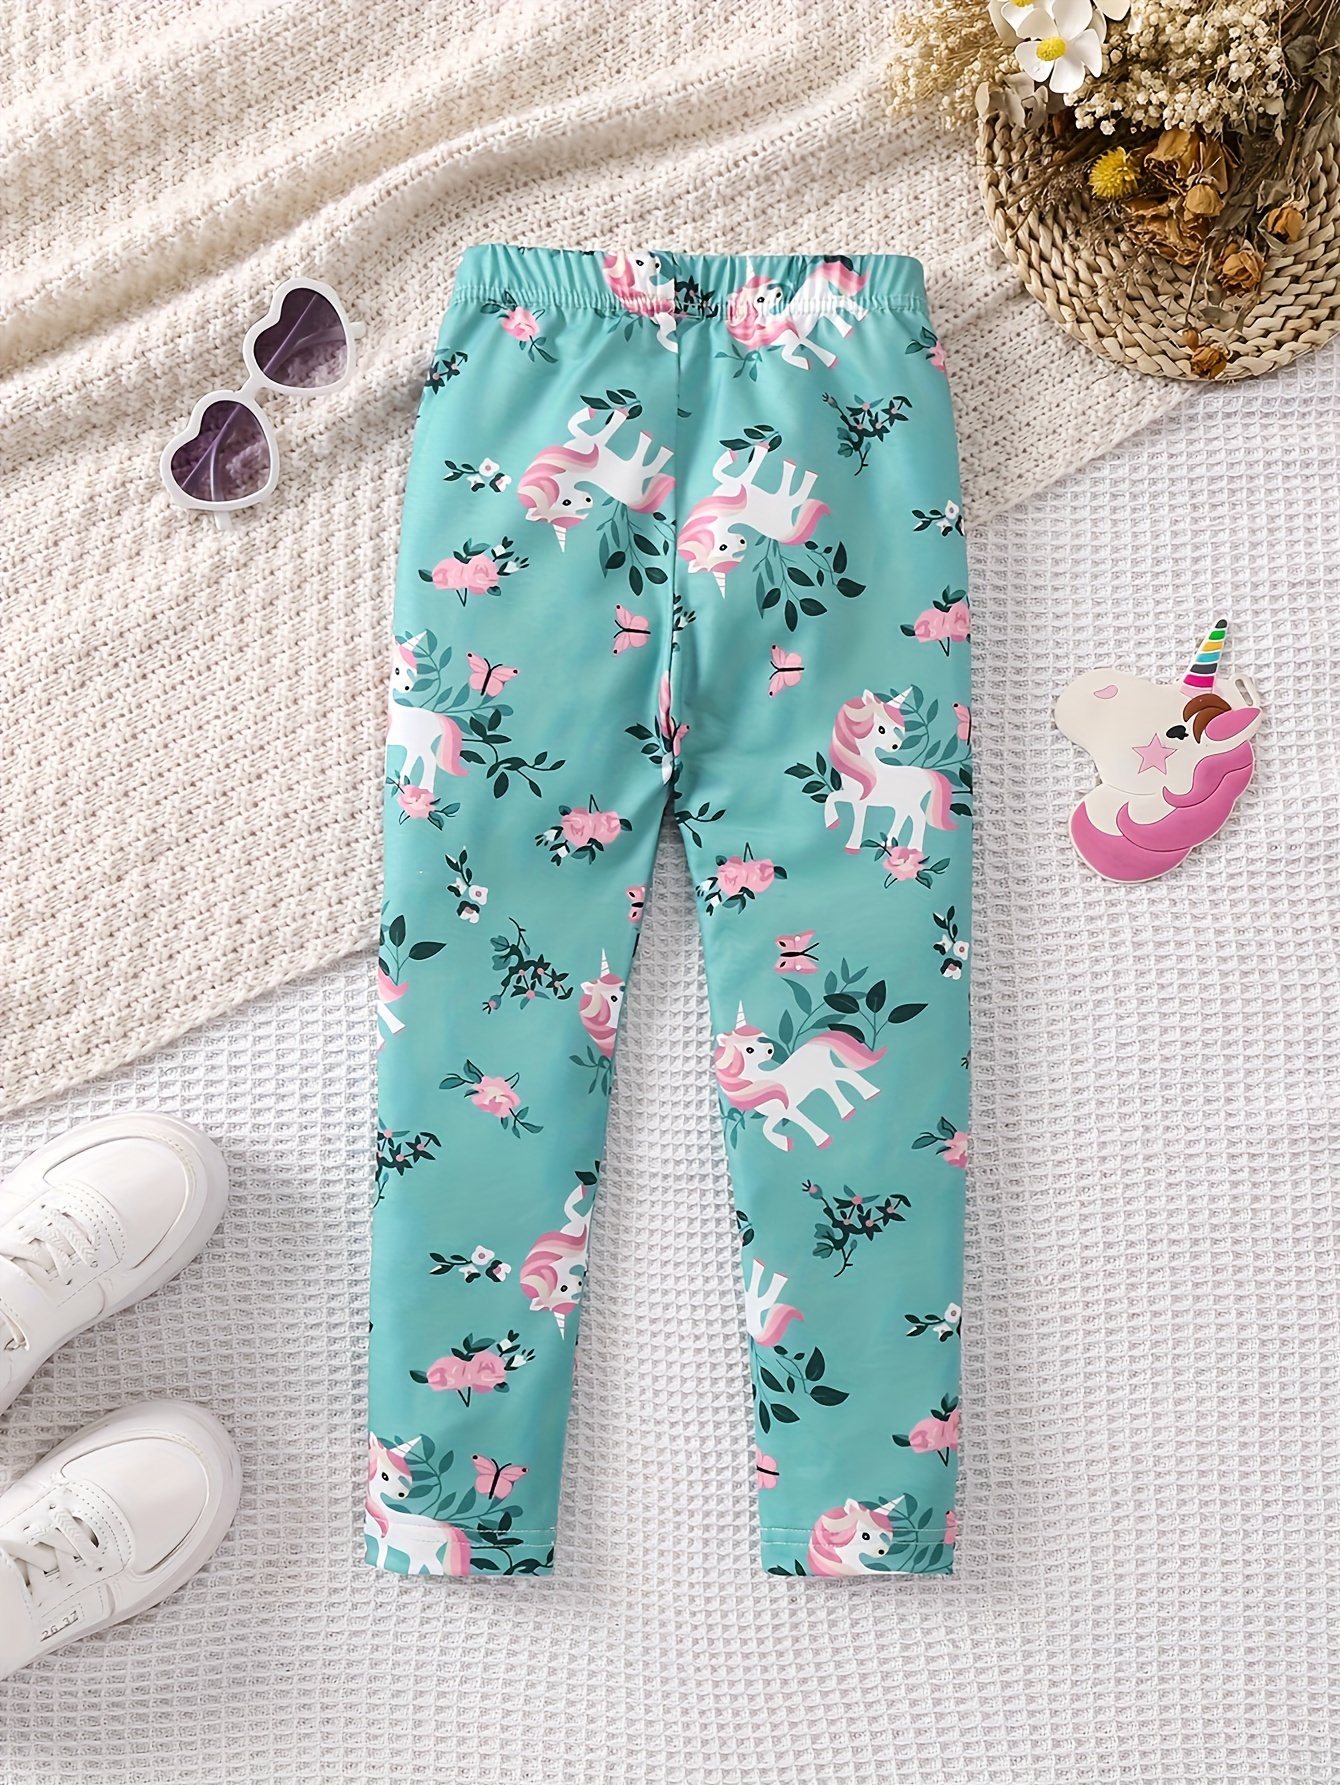 GIRLS PINK HAREM Pants Many Kids Size Toddlers Trousers Kids Comfy Clothing  Light Weight Summer Pants for Children's 